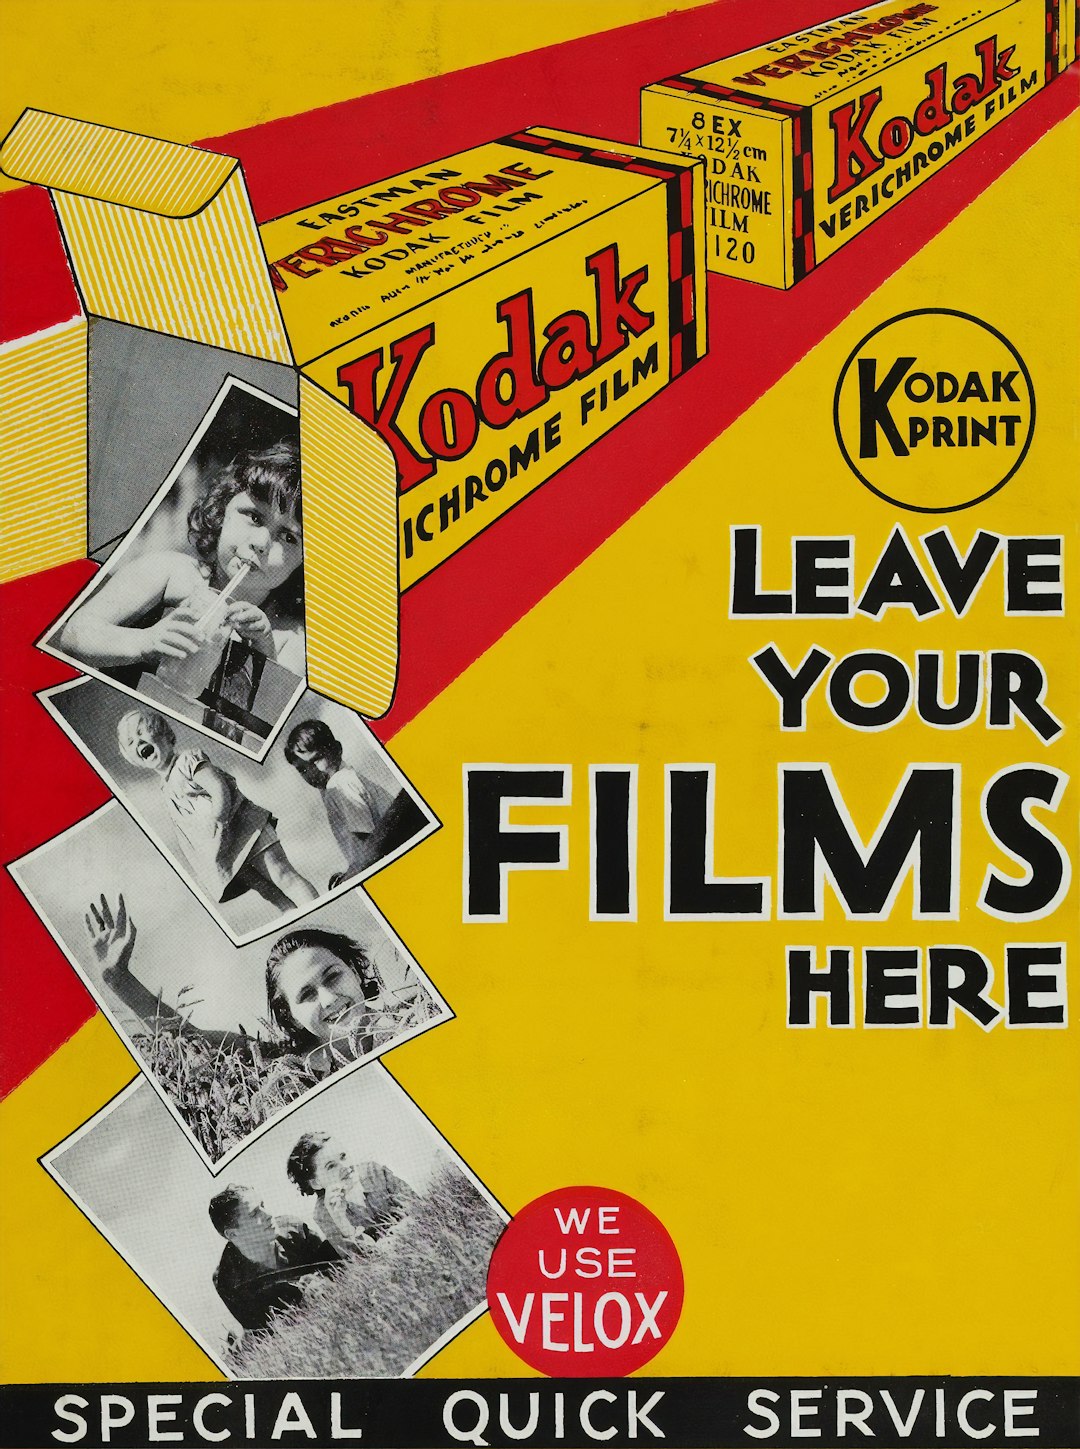 Poster - 'Leave Your Films Here' Museums Victoria Courtesy of Kodak (Australasia) Pty Ltd https://collections.museumvictoria.com.au/items/1382983